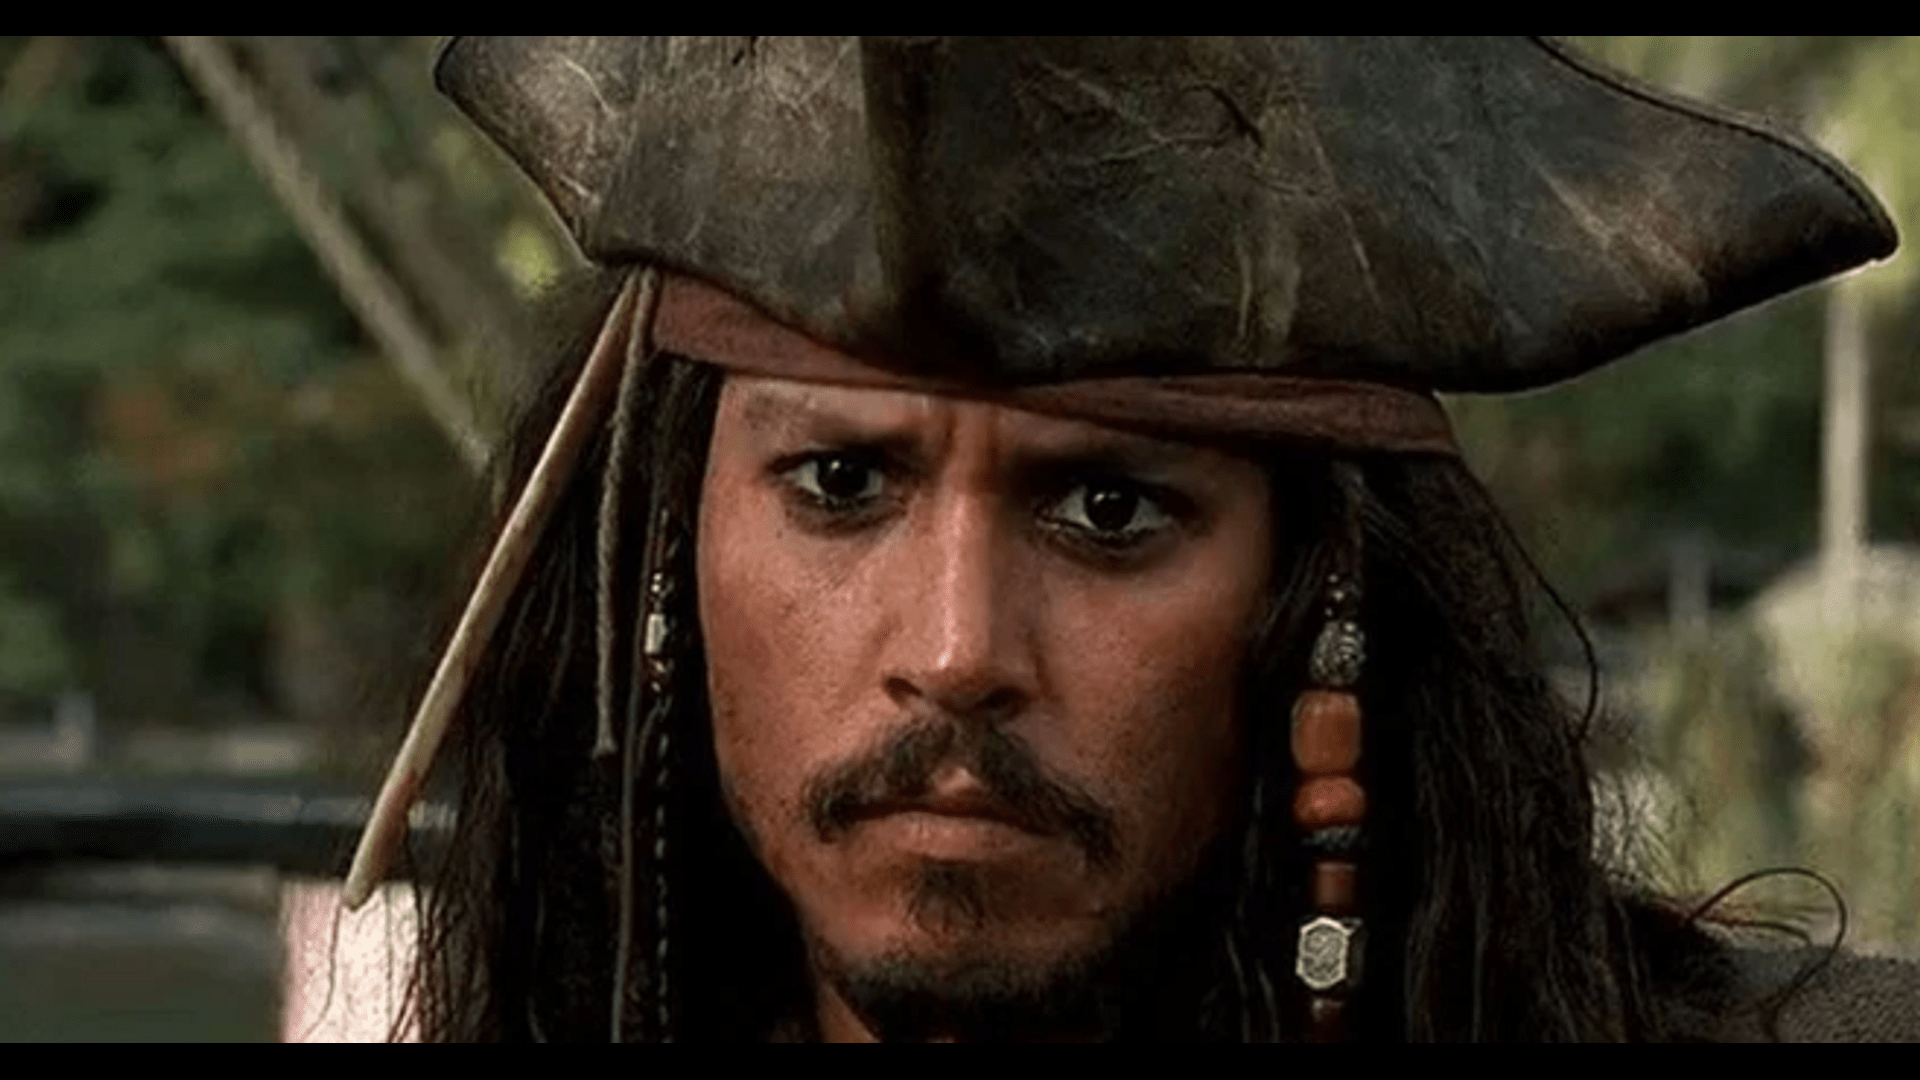 Johnny Depp Wouldn't Return to 'Pirates of the Caribbean' for $300 Million